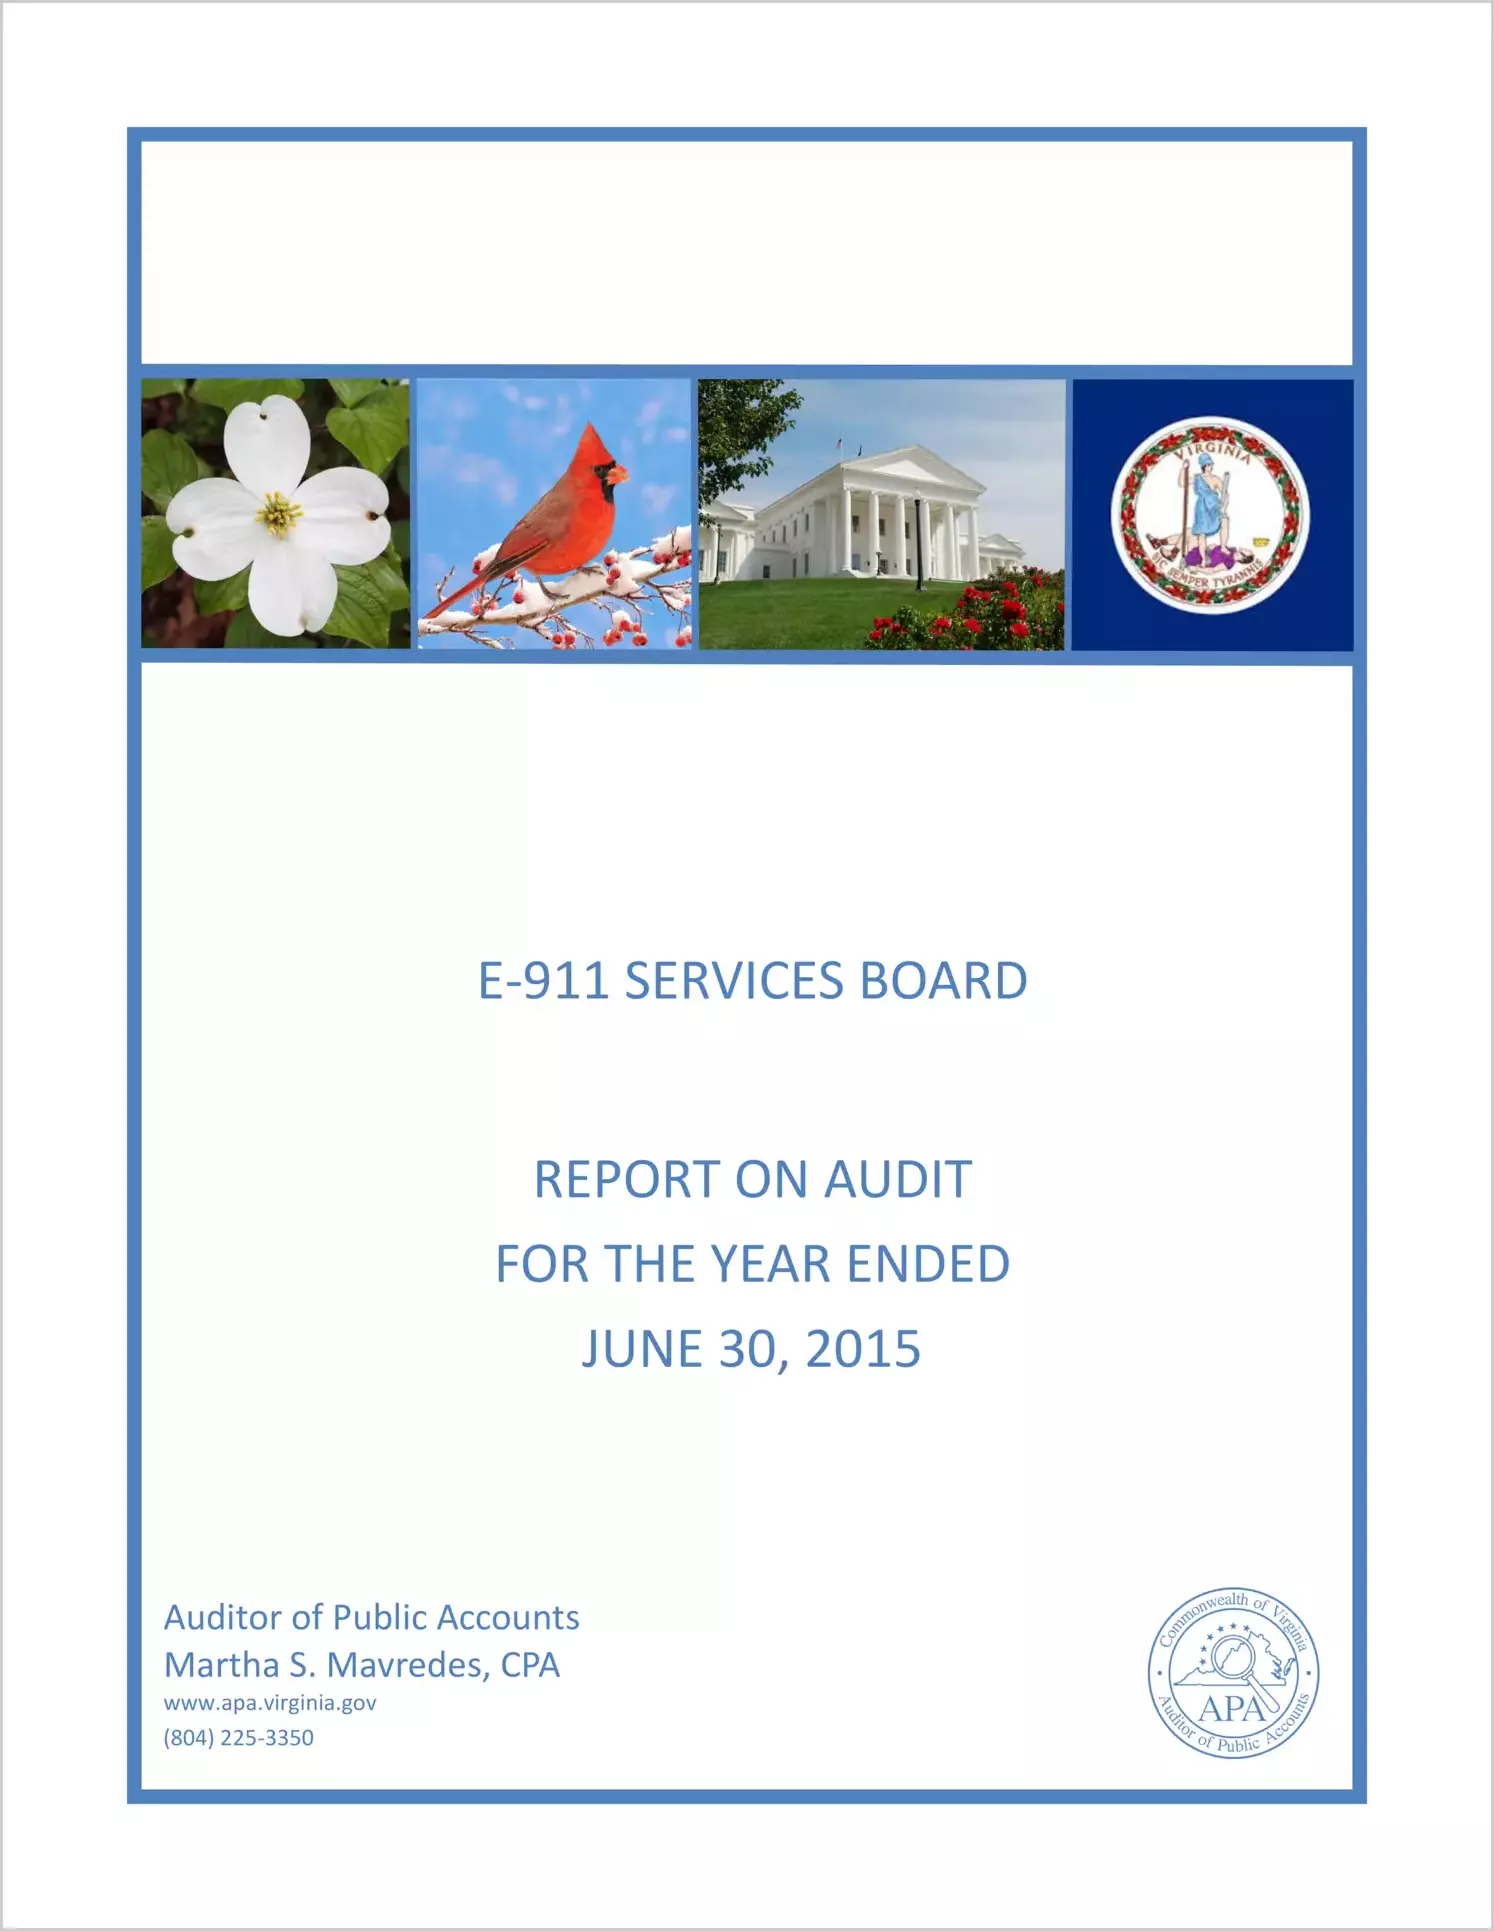 E-911 Services Board for the year ended June 30, 2015